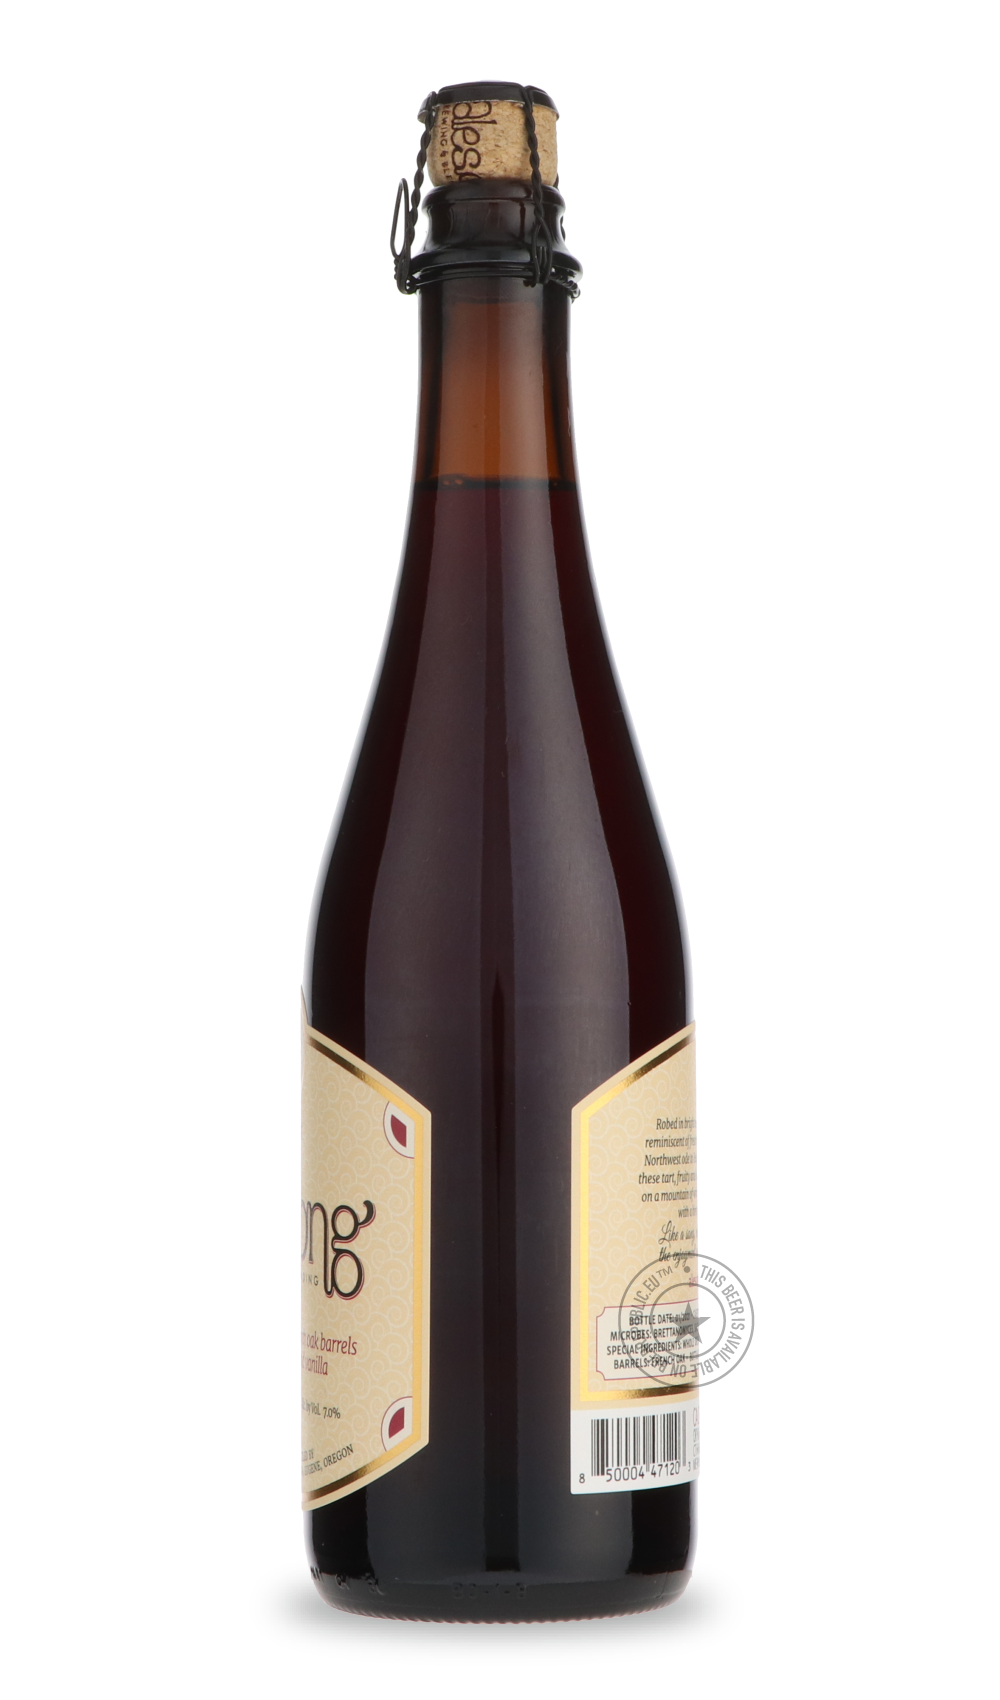 -Alesong- Kriek 2021-Sour / Wild & Fruity- Only @ Beer Republic - The best online beer store for American & Canadian craft beer - Buy beer online from the USA and Canada - Bier online kopen - Amerikaans bier kopen - Craft beer store - Craft beer kopen - Amerikanisch bier kaufen - Bier online kaufen - Acheter biere online - IPA - Stout - Porter - New England IPA - Hazy IPA - Imperial Stout - Barrel Aged - Barrel Aged Imperial Stout - Brown - Dark beer - Blond - Blonde - Pilsner - Lager - Wheat - Weizen - Amb